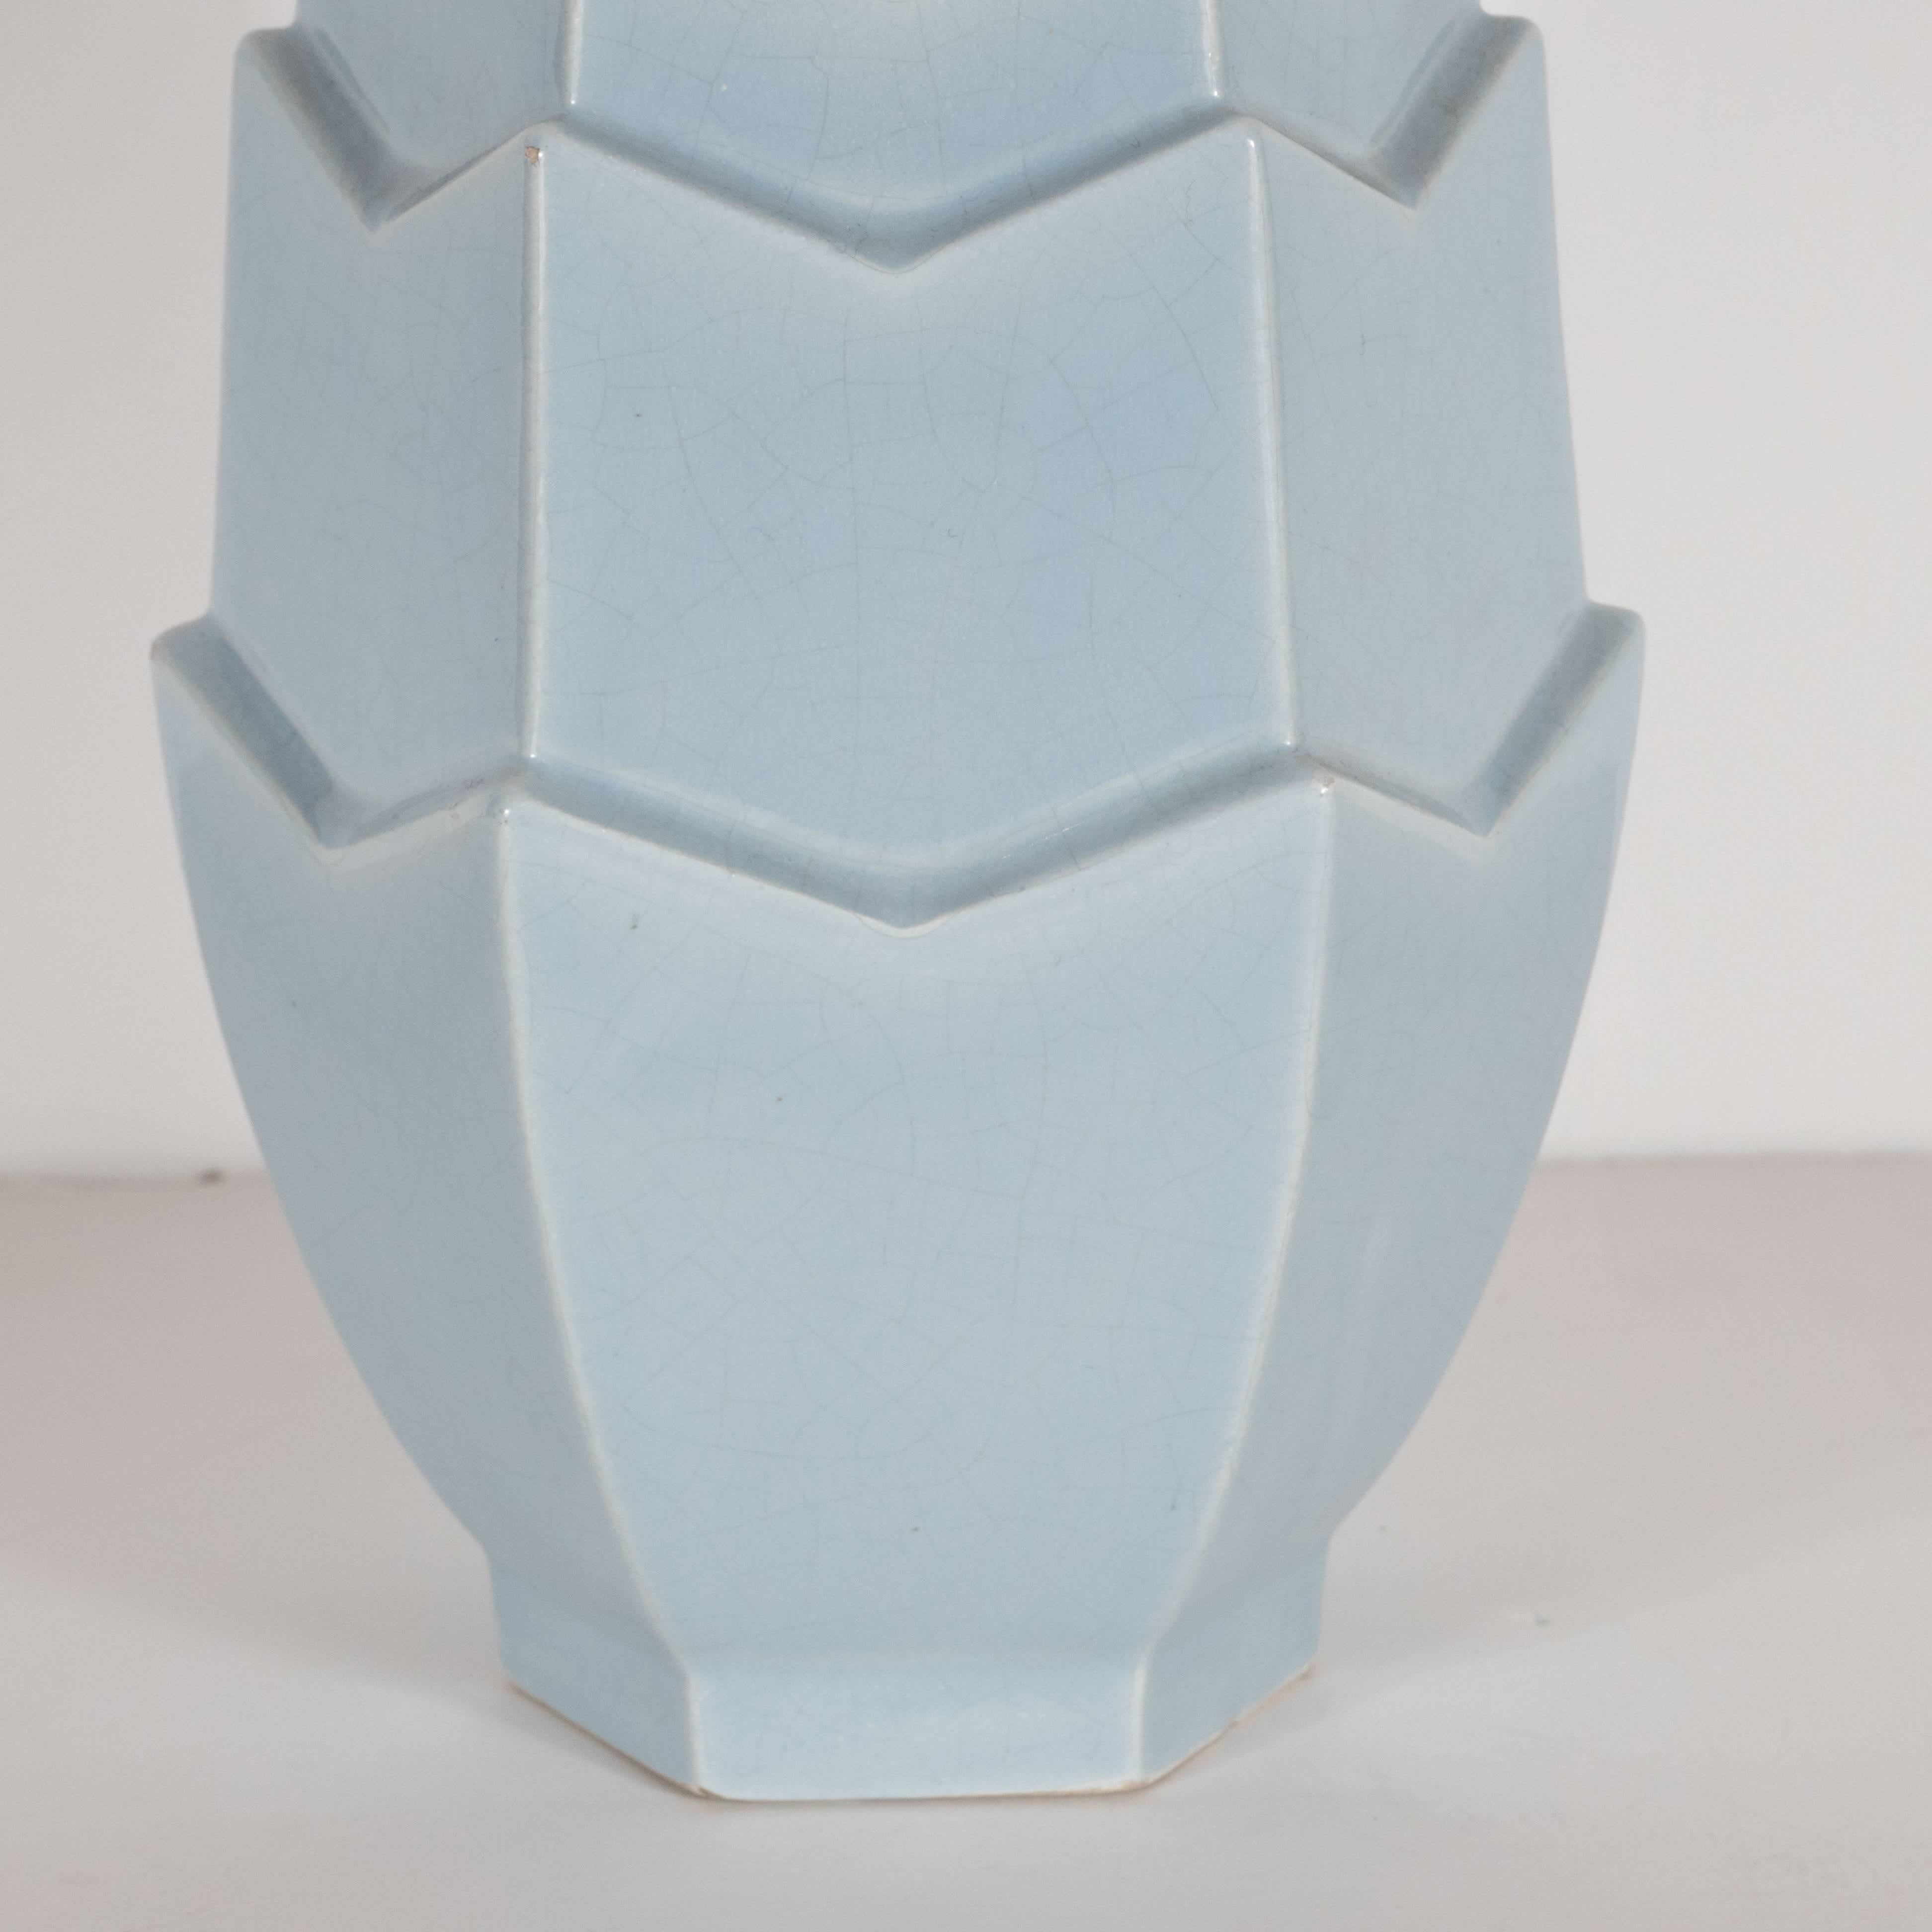 The renowned ceramic manufacturer Saint Clemente produced this Art Deco vase in the early 1930s. Executed in a beautiful grey powder blue with a craquelure glaze, the vase features a skyscraper polyhedral design consisting of five-tiers with notched